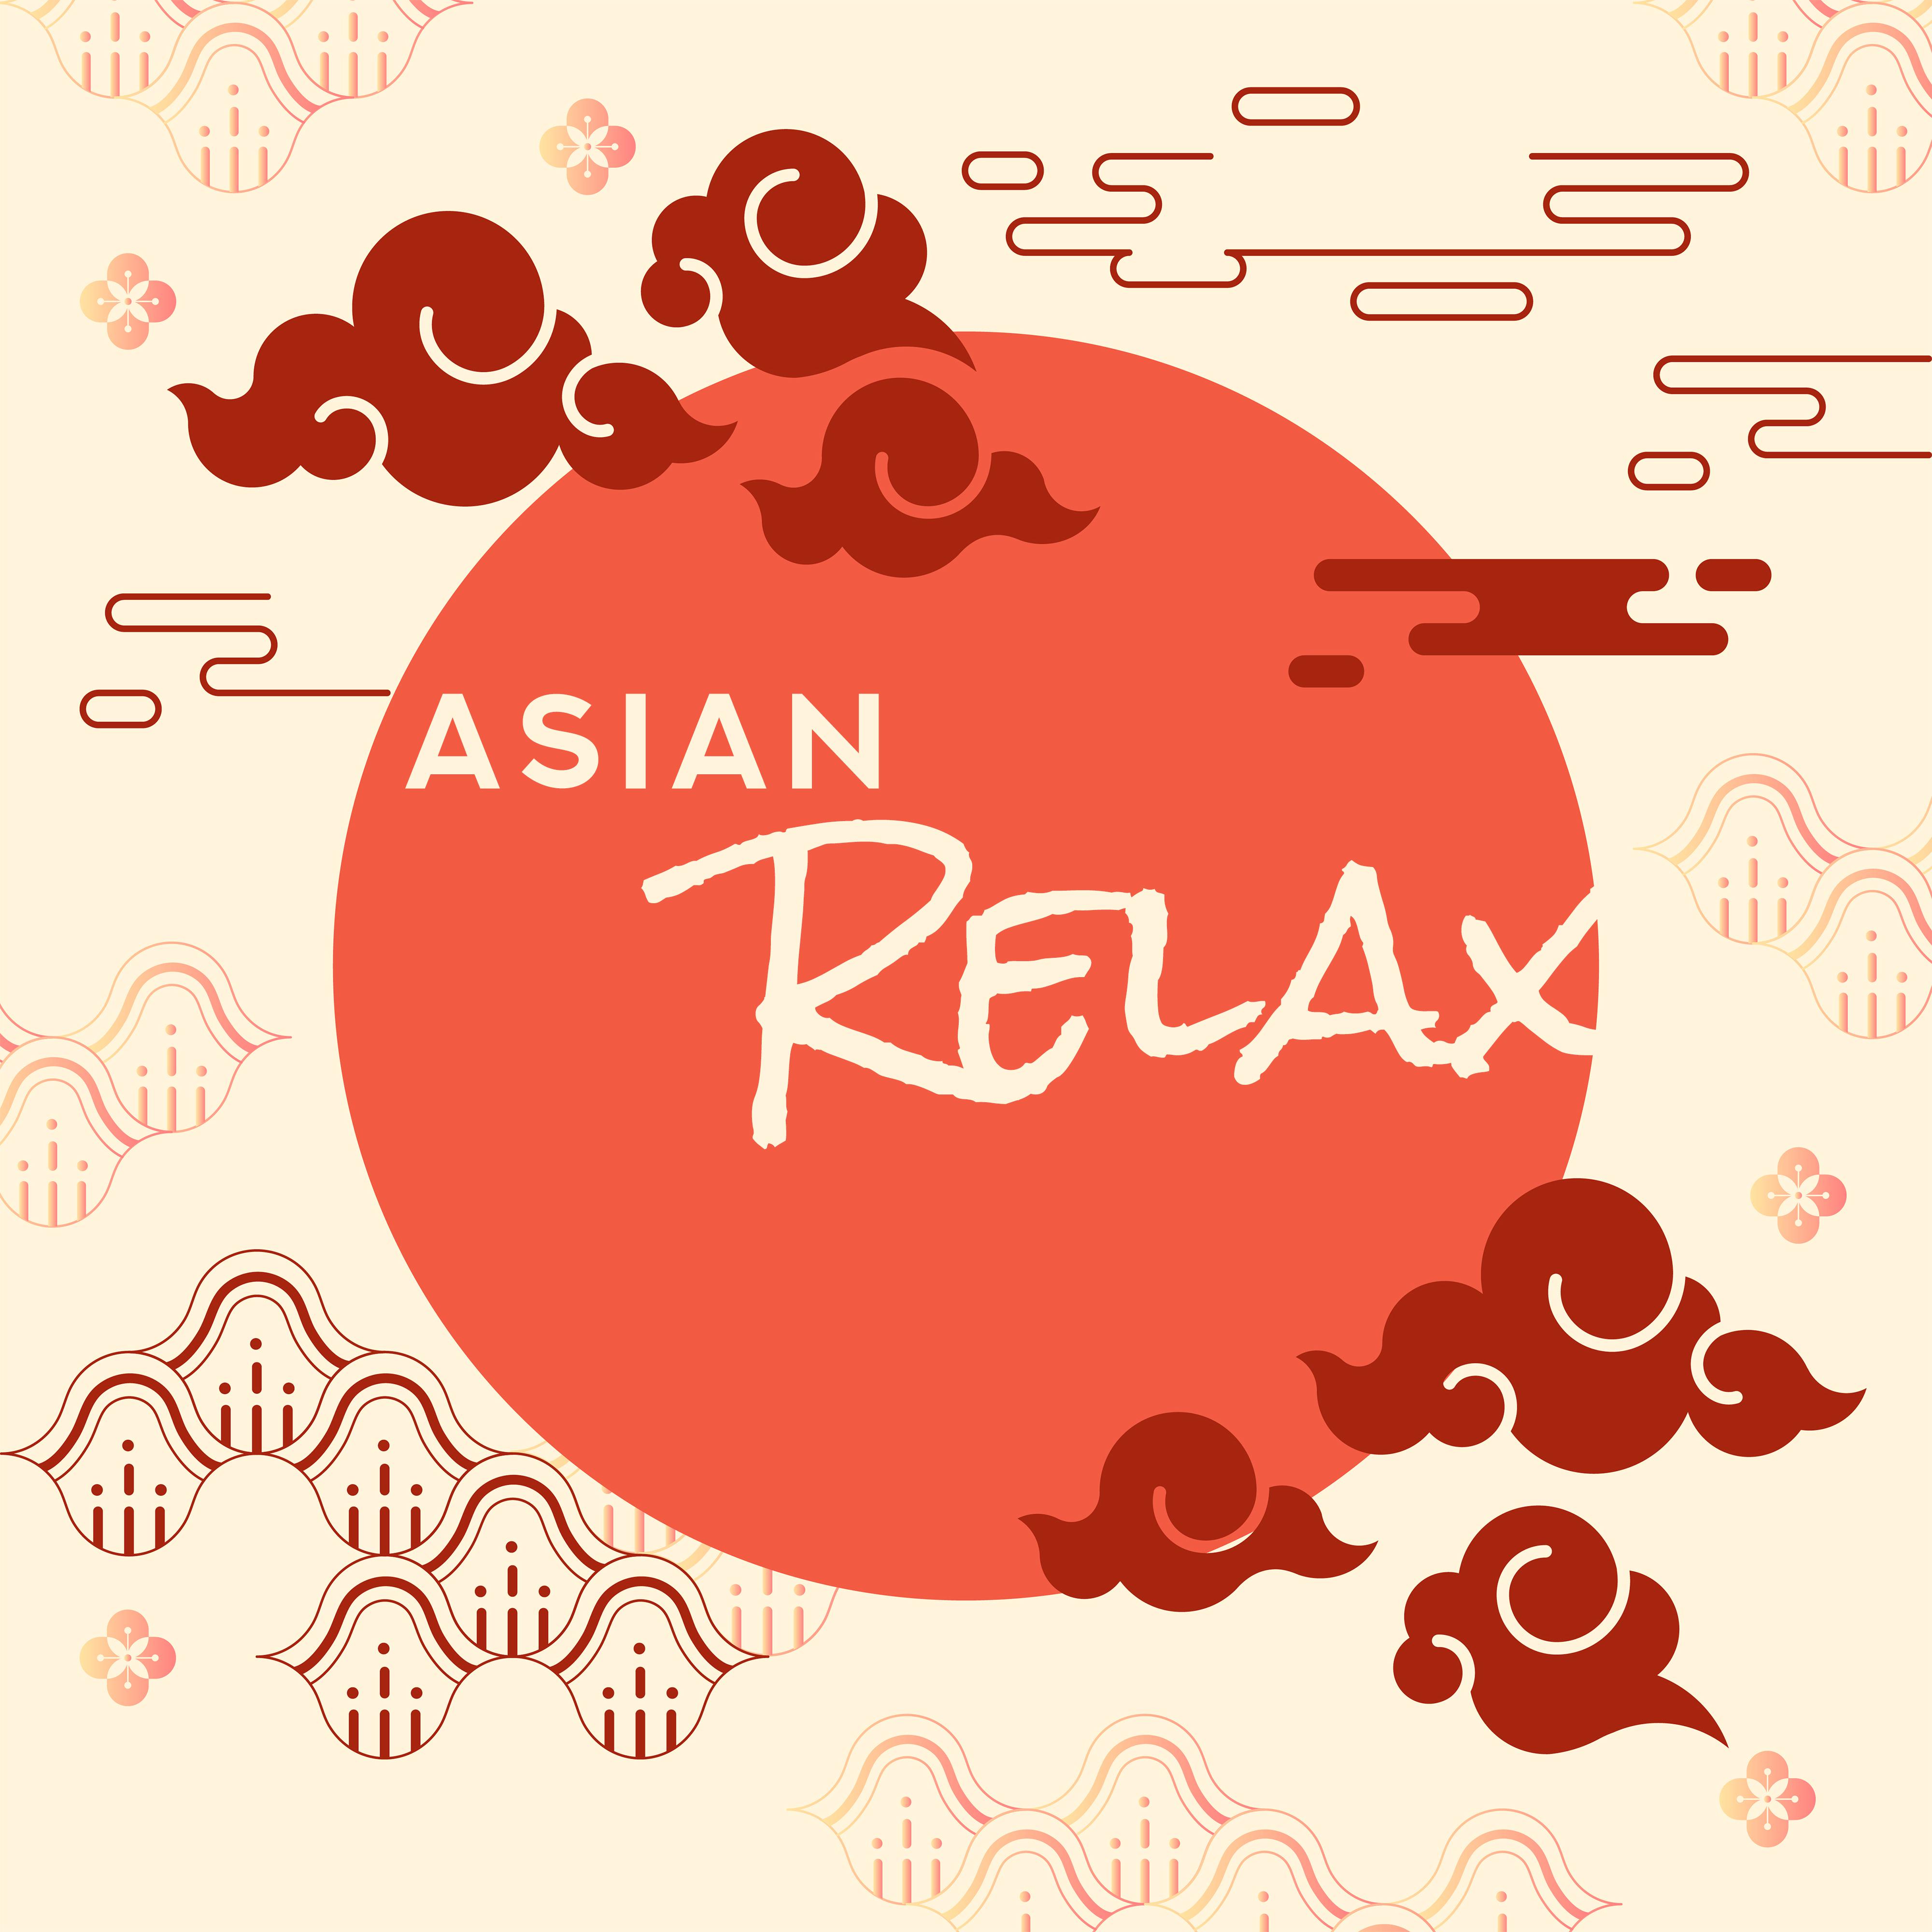 Asian Relax: Yoga Chill, Deep Meditation, Relaxation, Chillout 2019